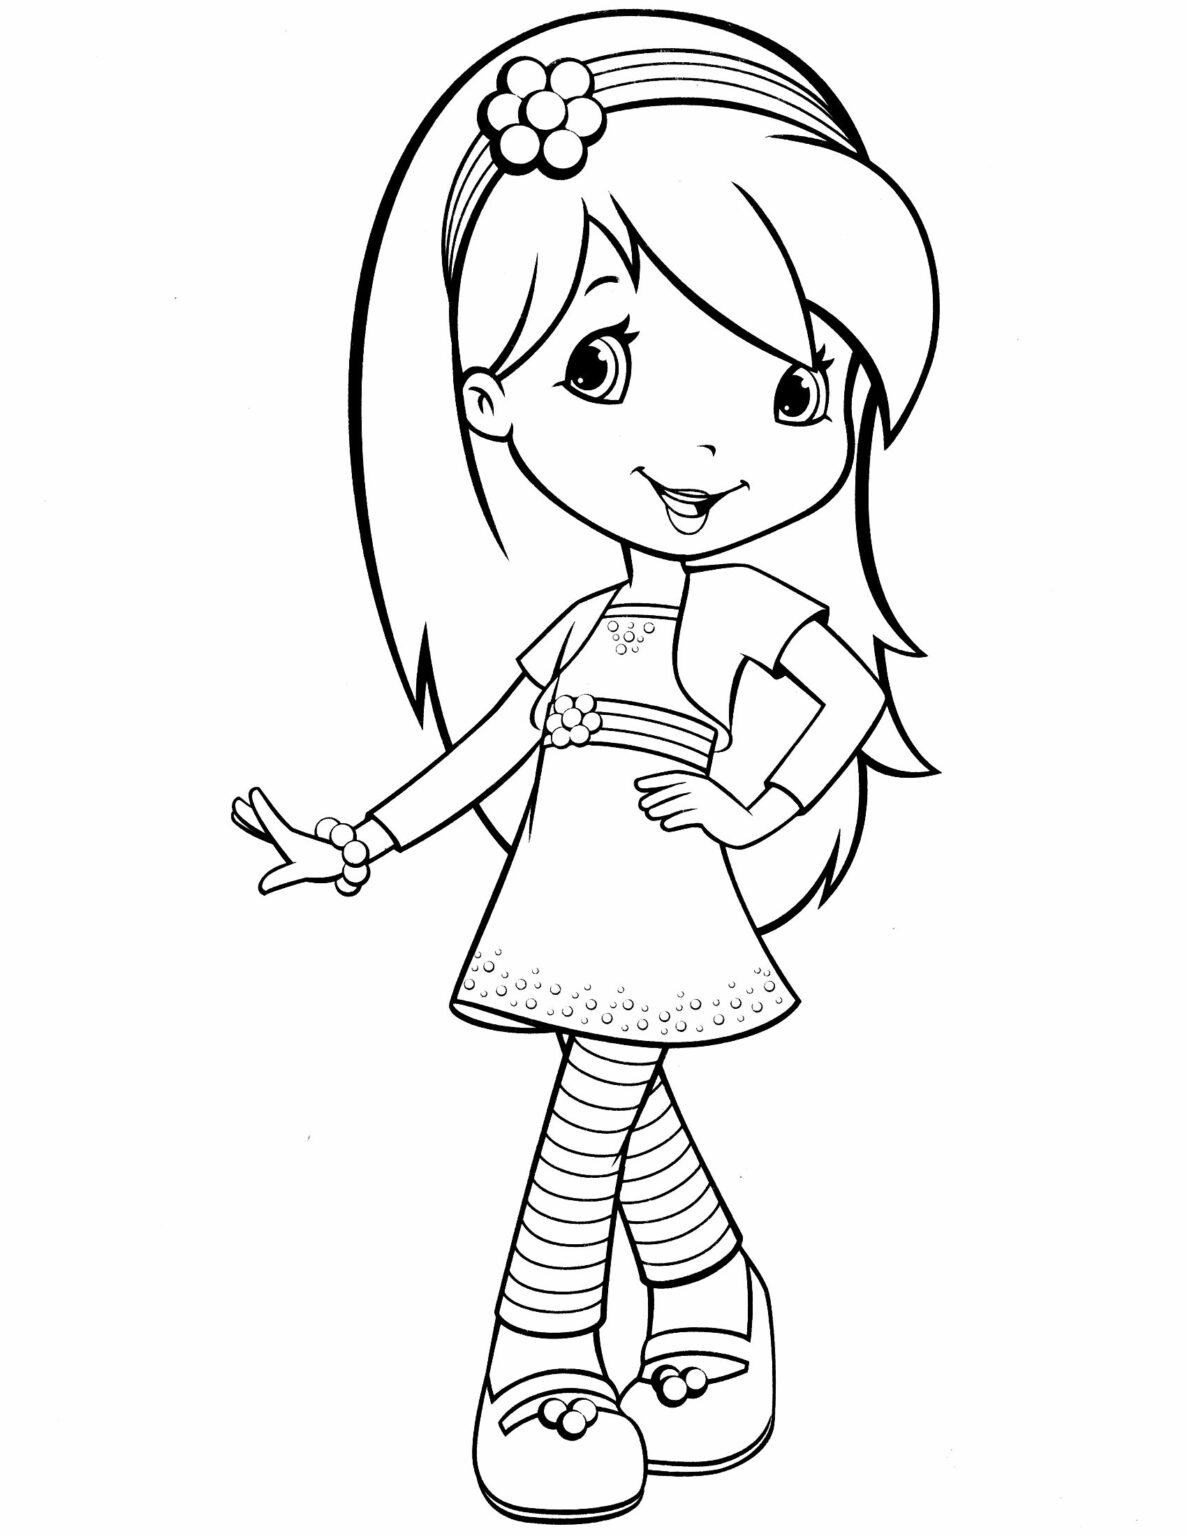 Strawberry Shortcake Coloring Pages Pdf To Print - Coloringfolder.com